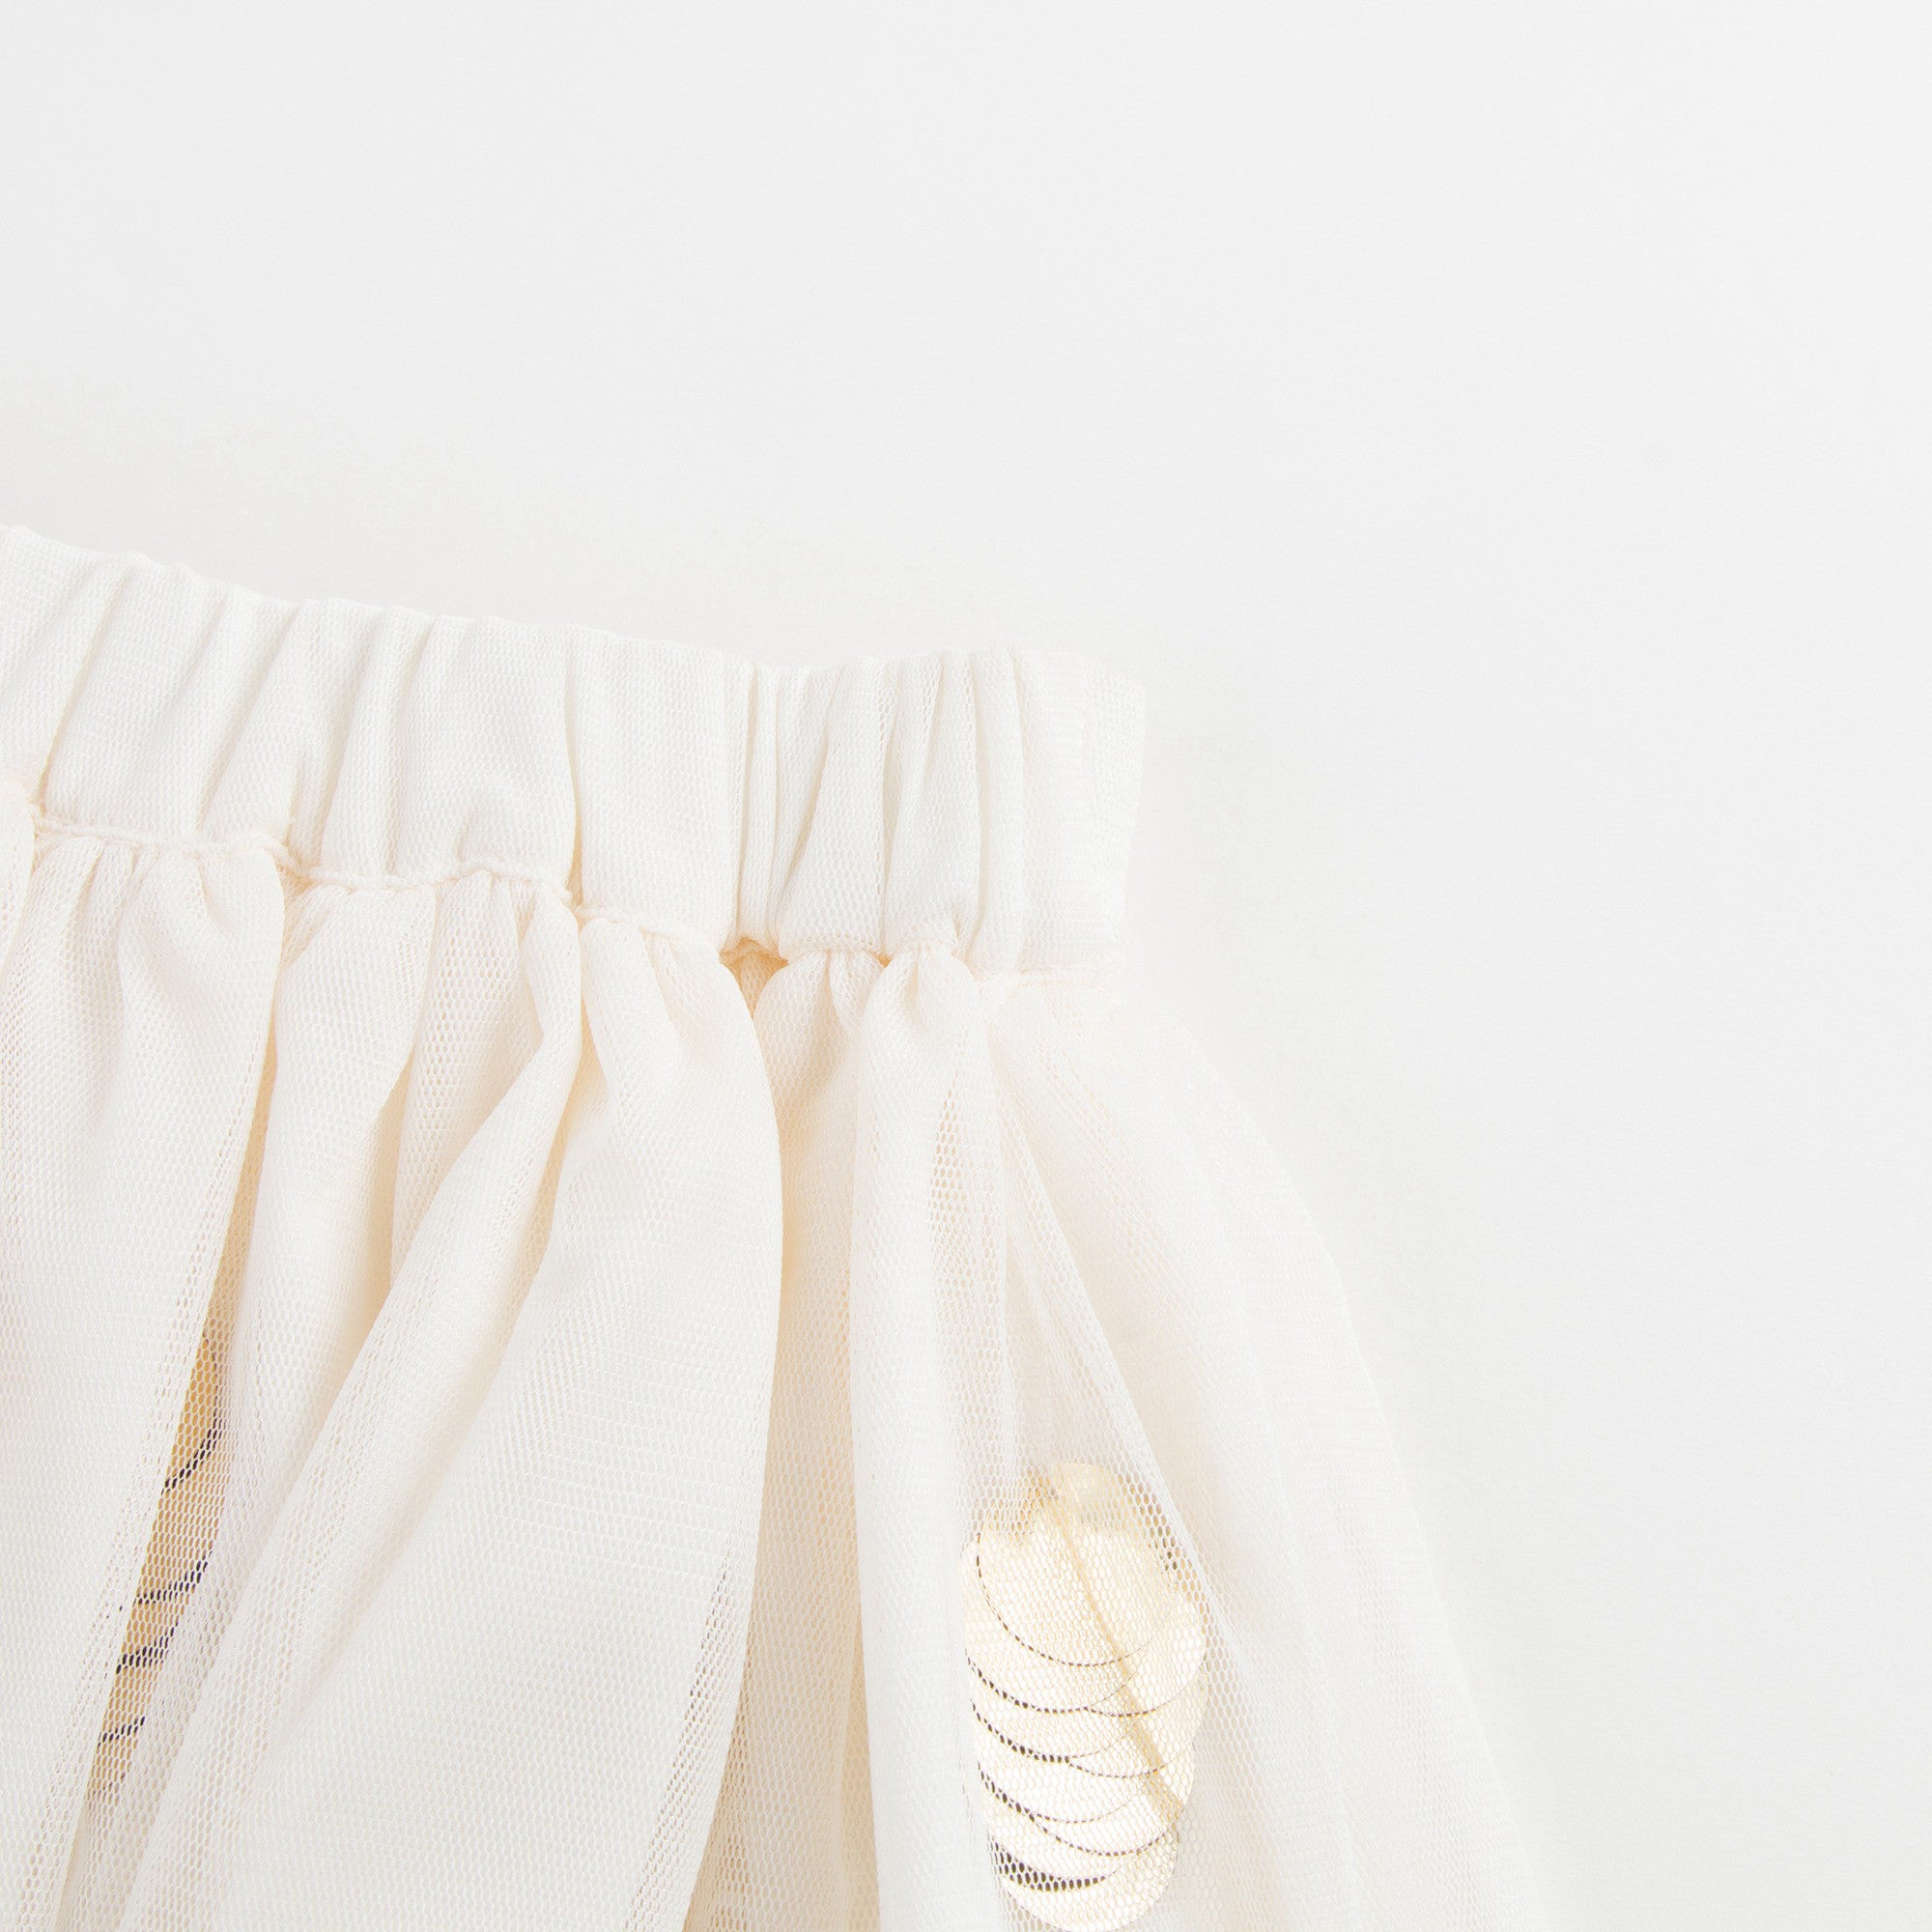 Girls Ivory Tiered Tulle Skirt